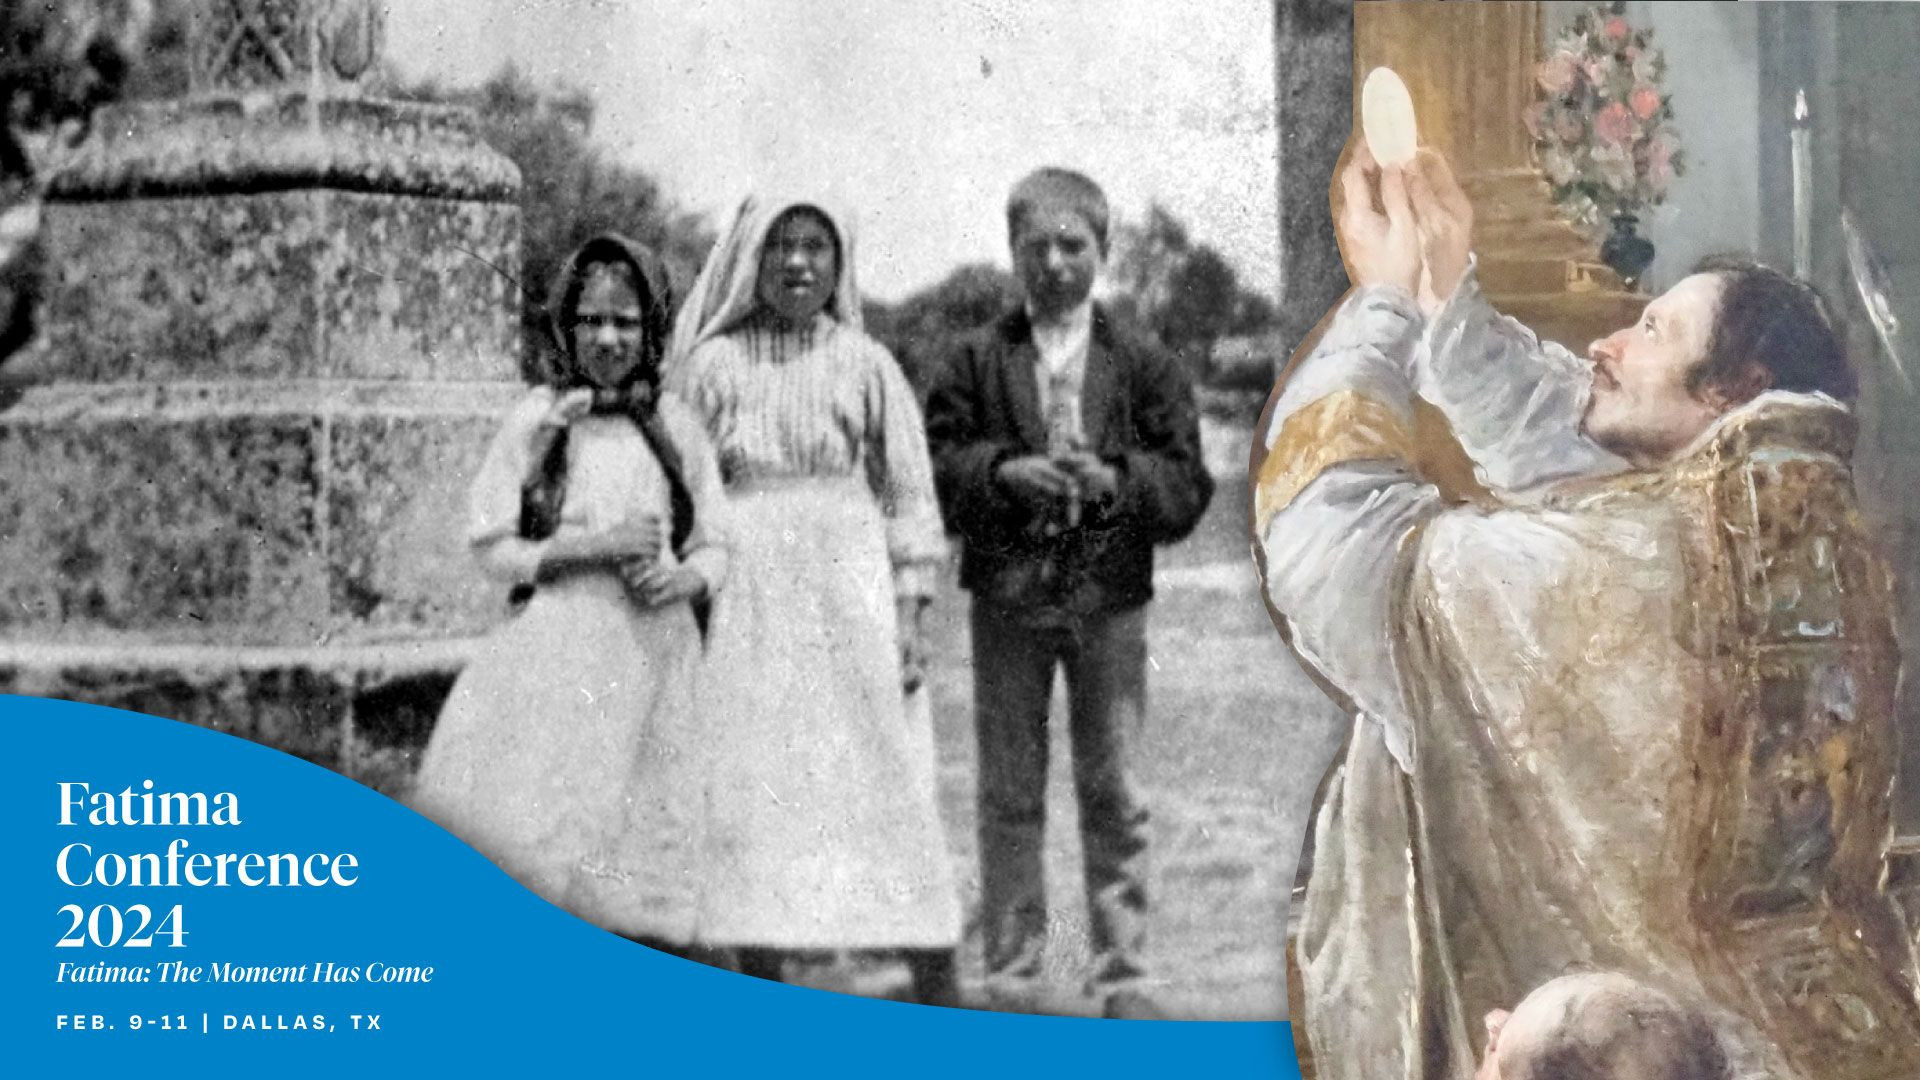 Jacinta and Francisco's Inspiring Devotion to Our Lord | FC24 Dallas, TX